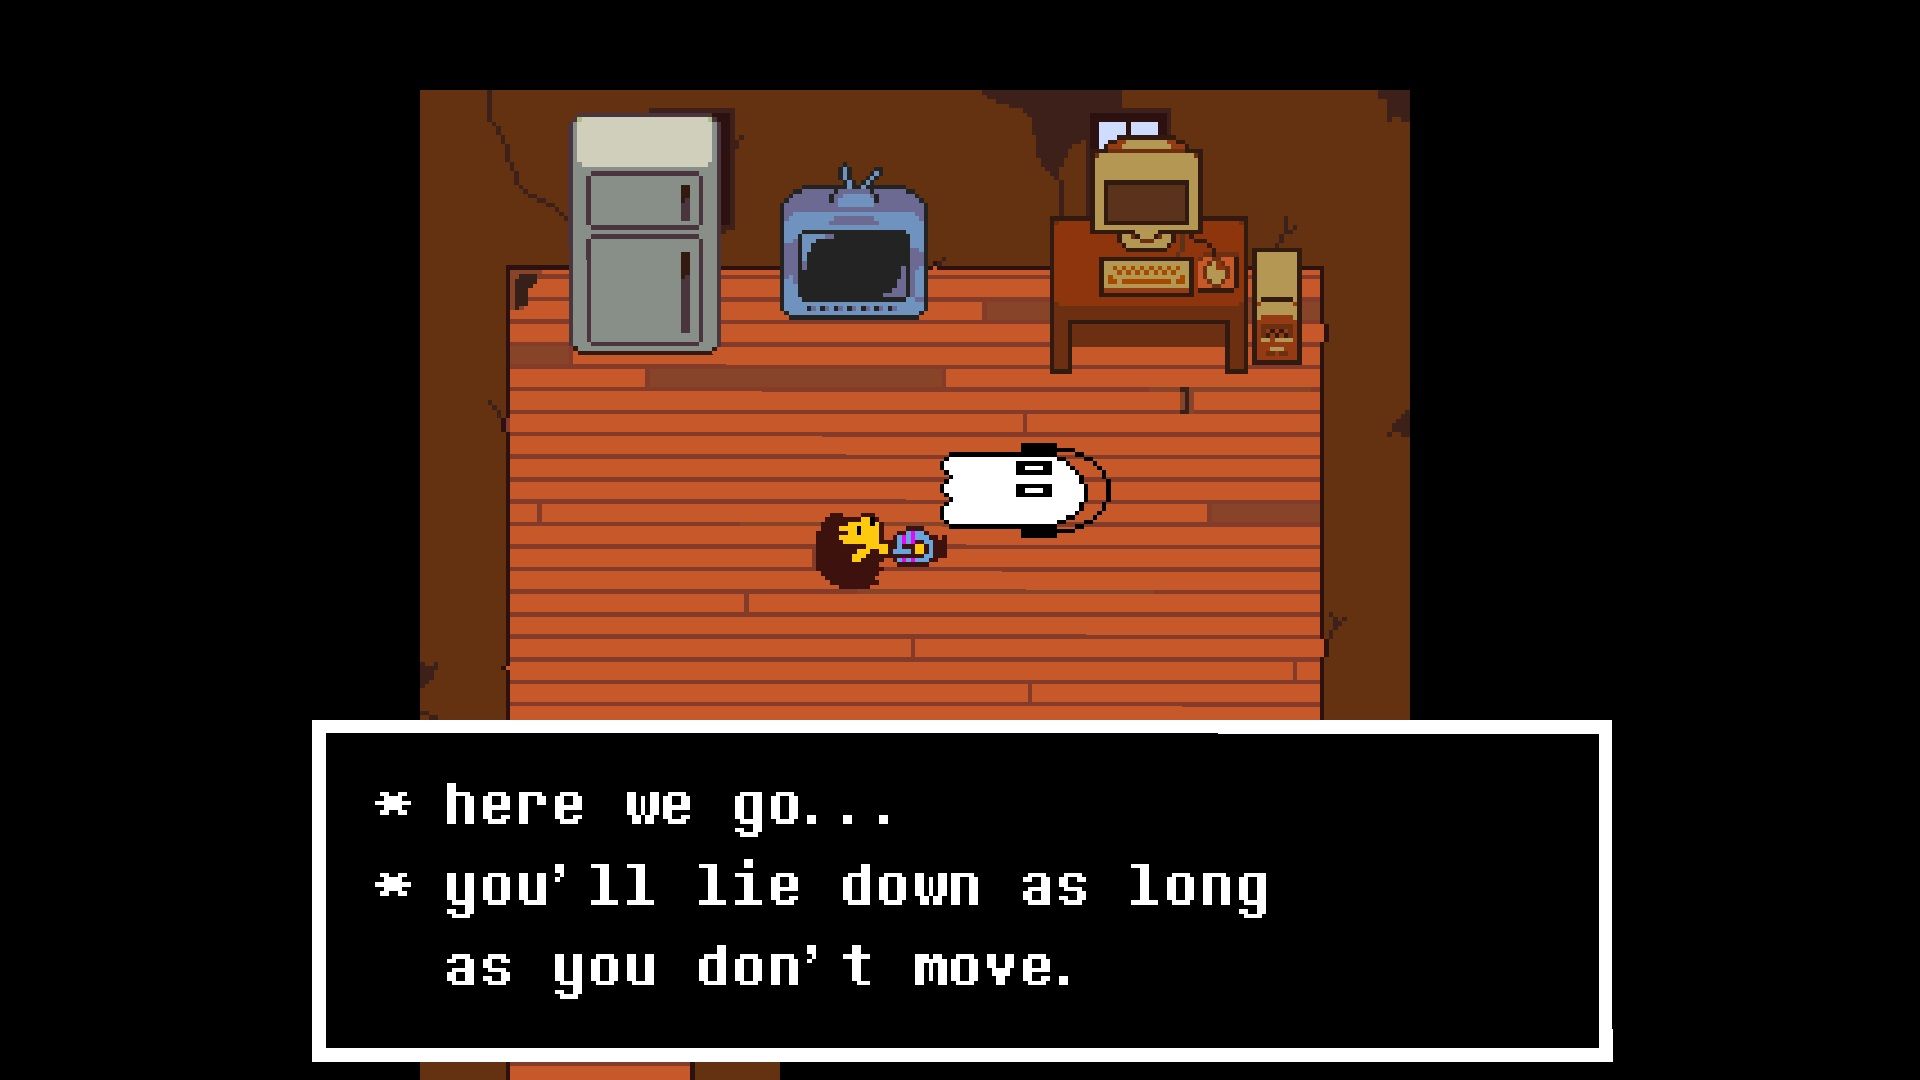 Undertale - The main character lays on the ground beside a ghost. A text box says "Here we go...you'll lie down as long as you don't move."